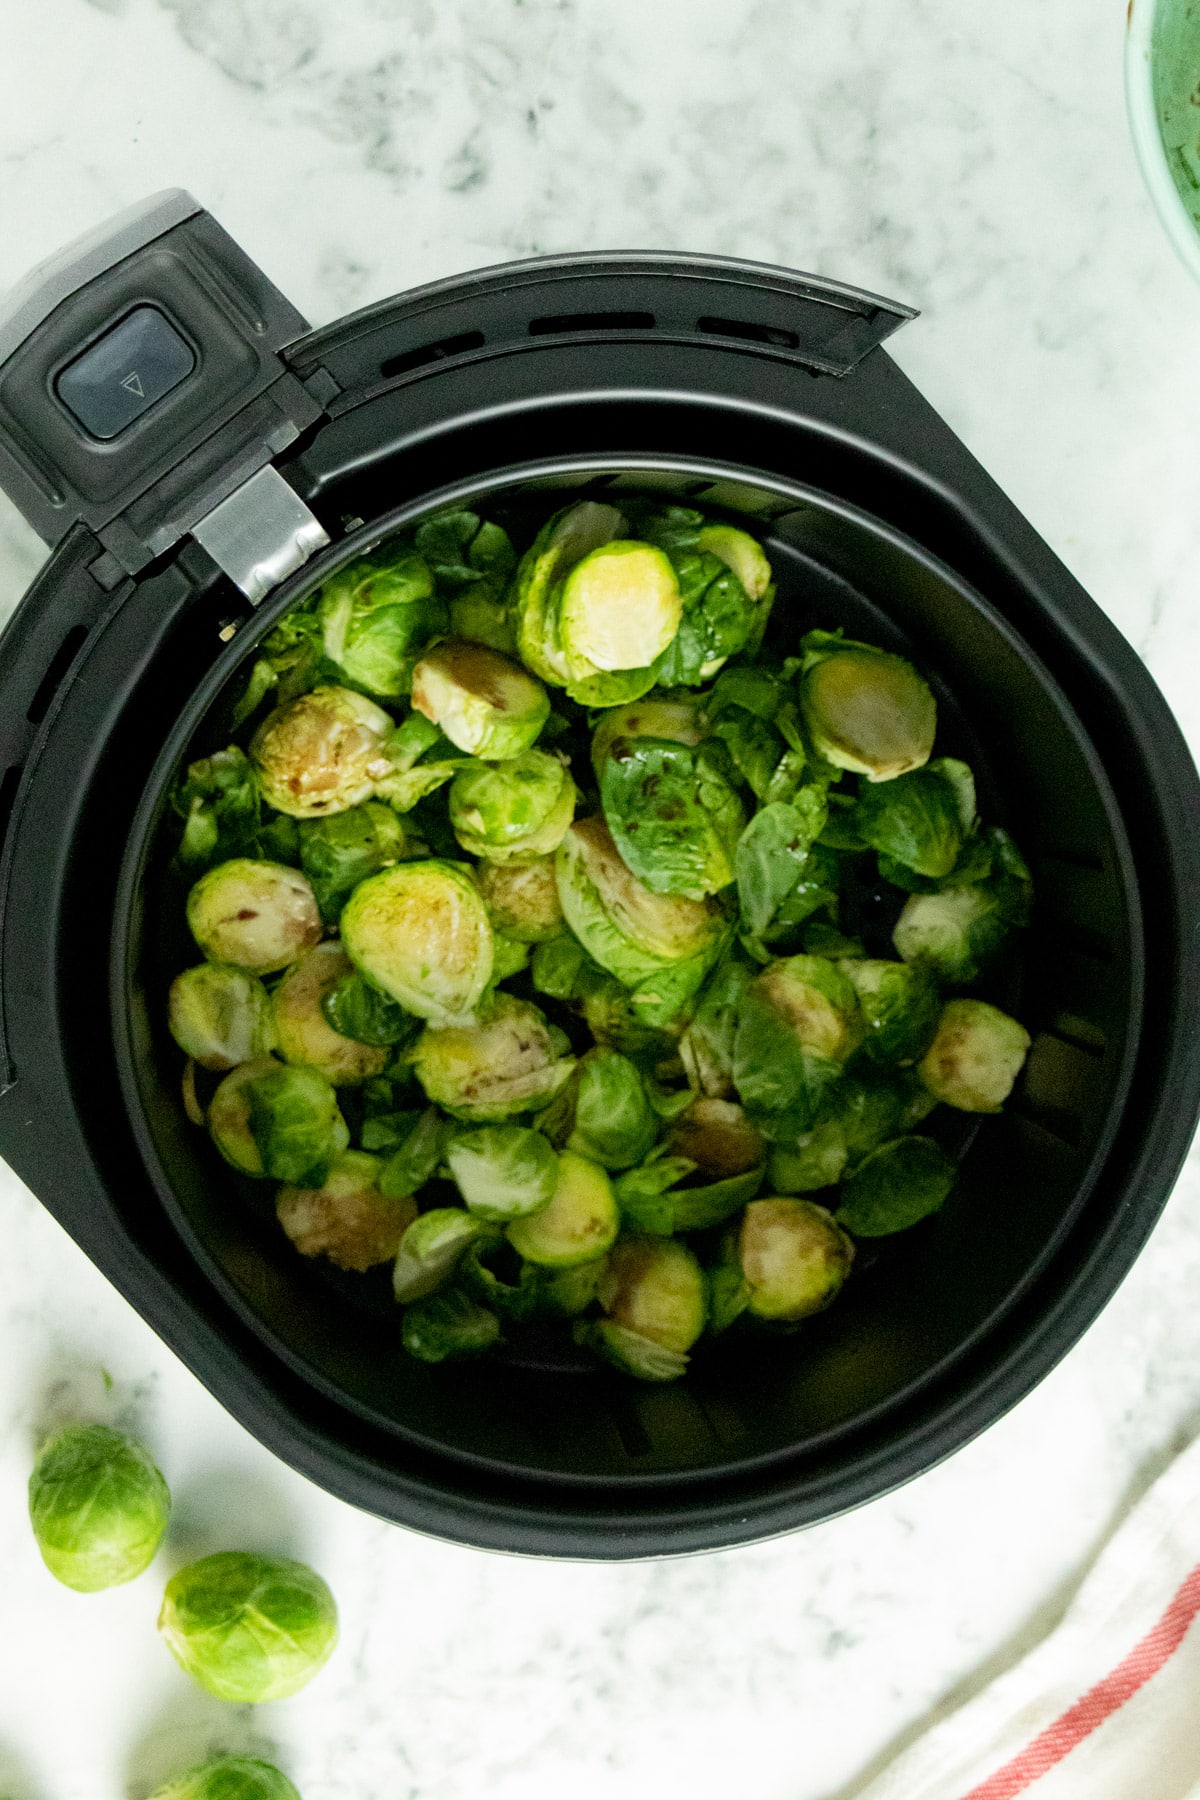 uncooked Brussels sprouts in the air fryer basket